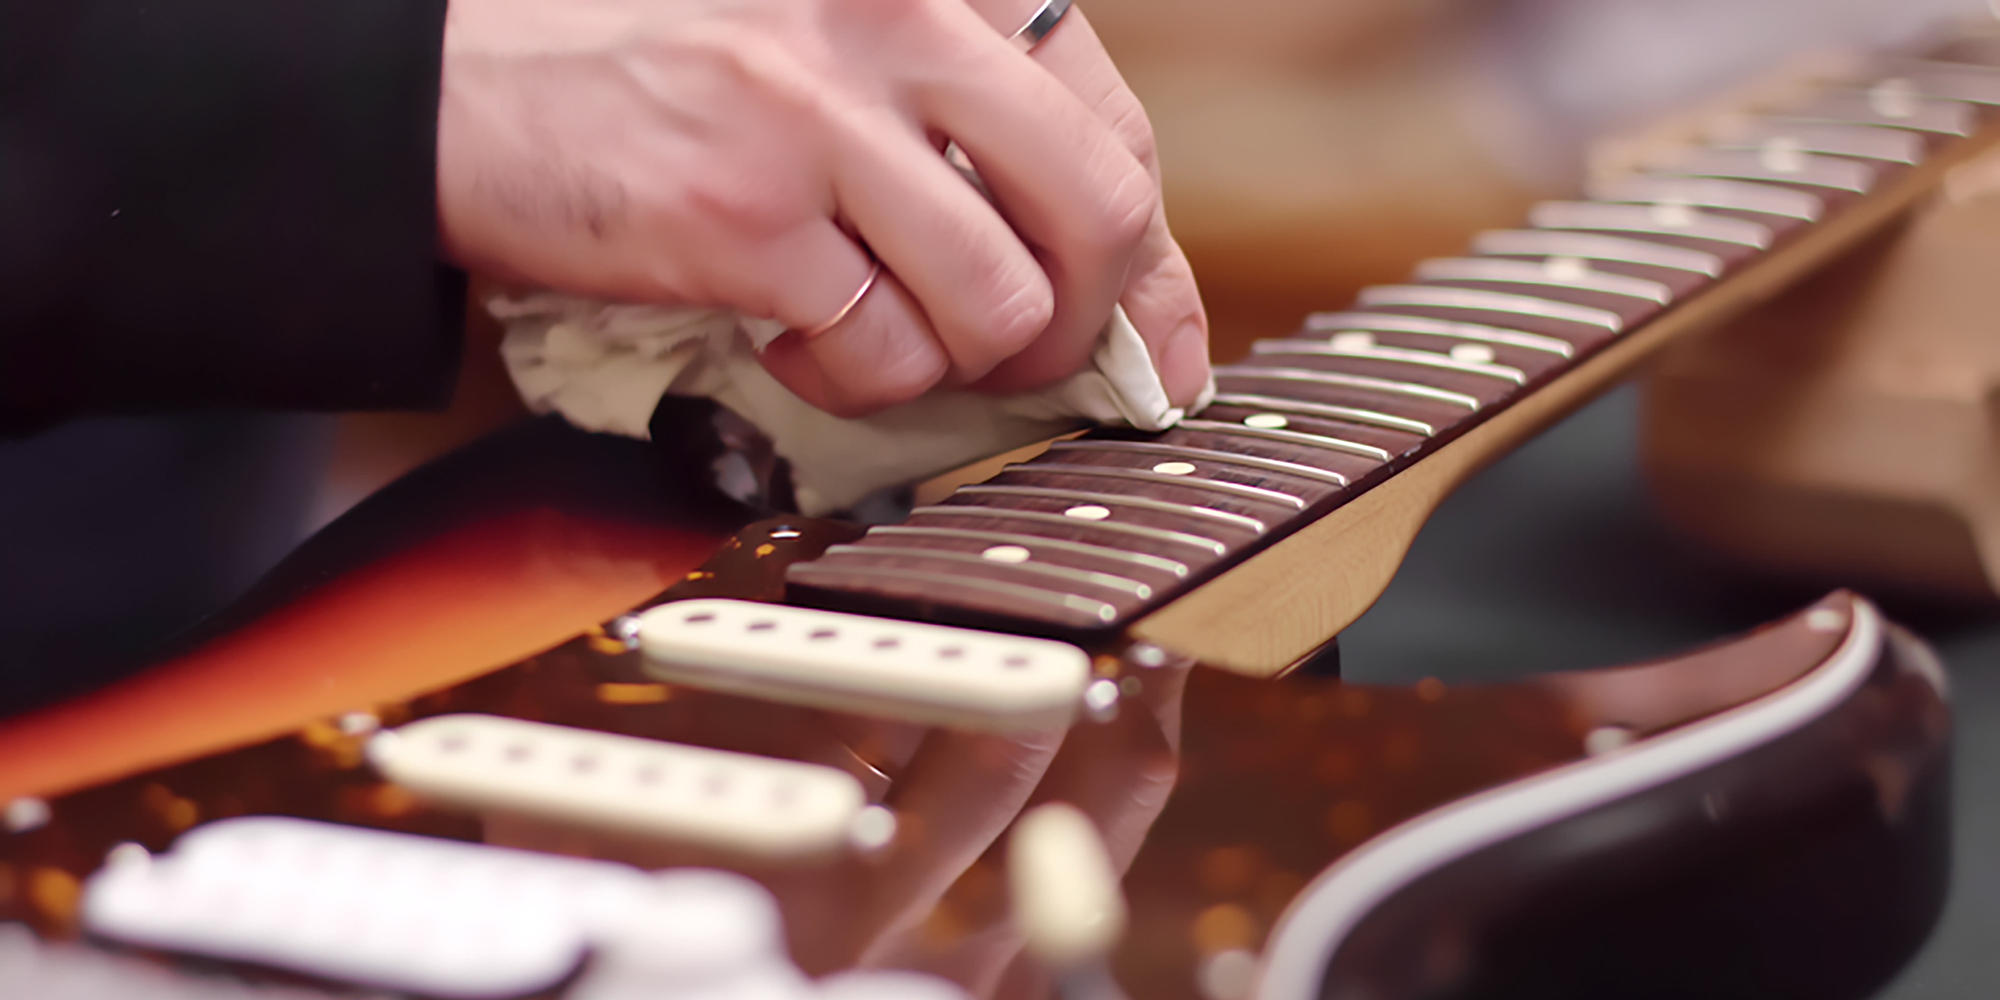 Proper Fretboard Maintenance - A Step-by-Step Guide